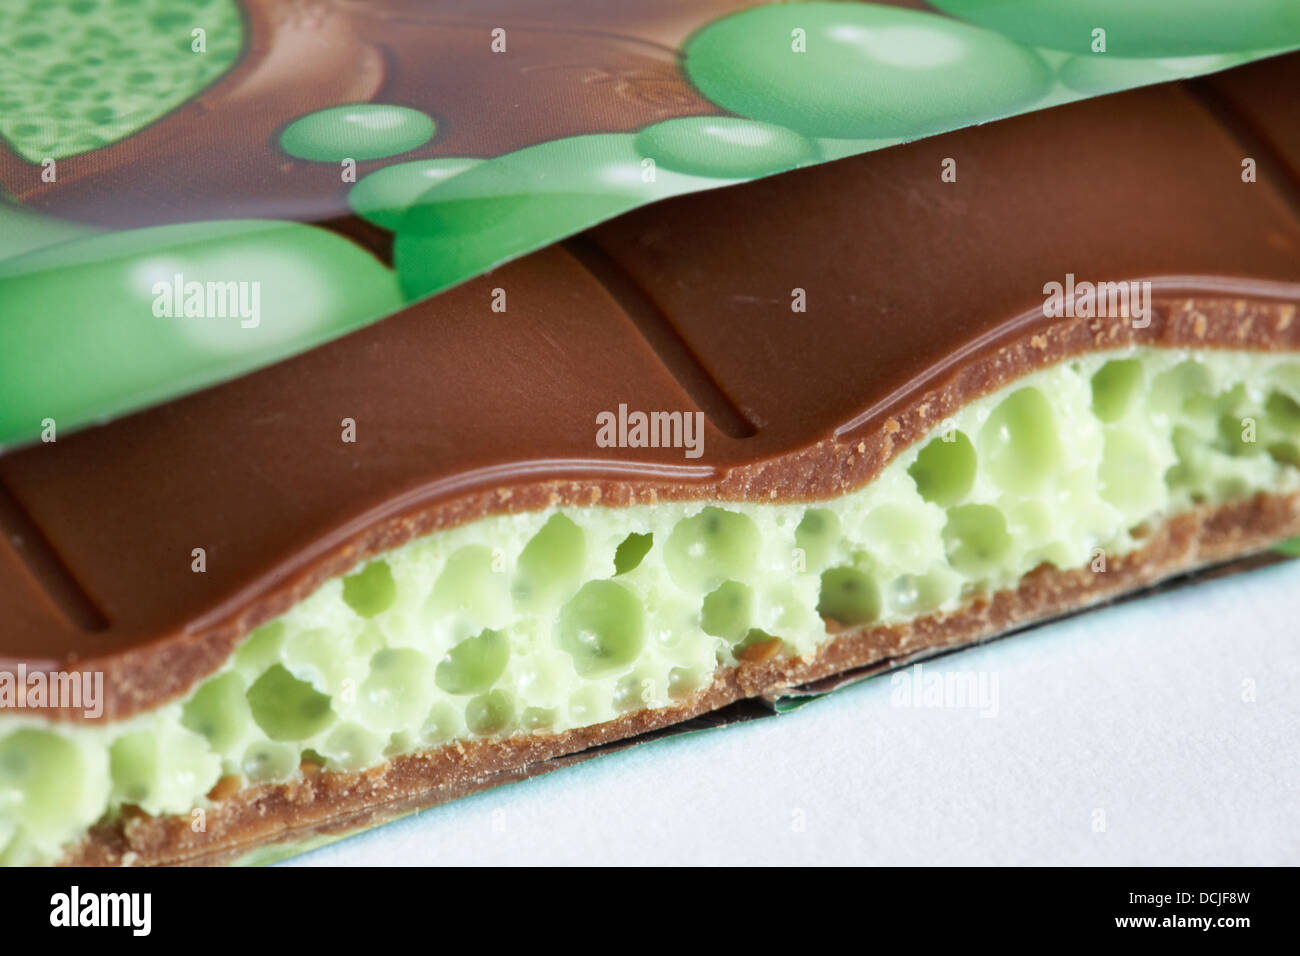 Nestle Mint aero new bubbly big bar of chocolate  with piece broken off to see inside set on white background Stock Photo